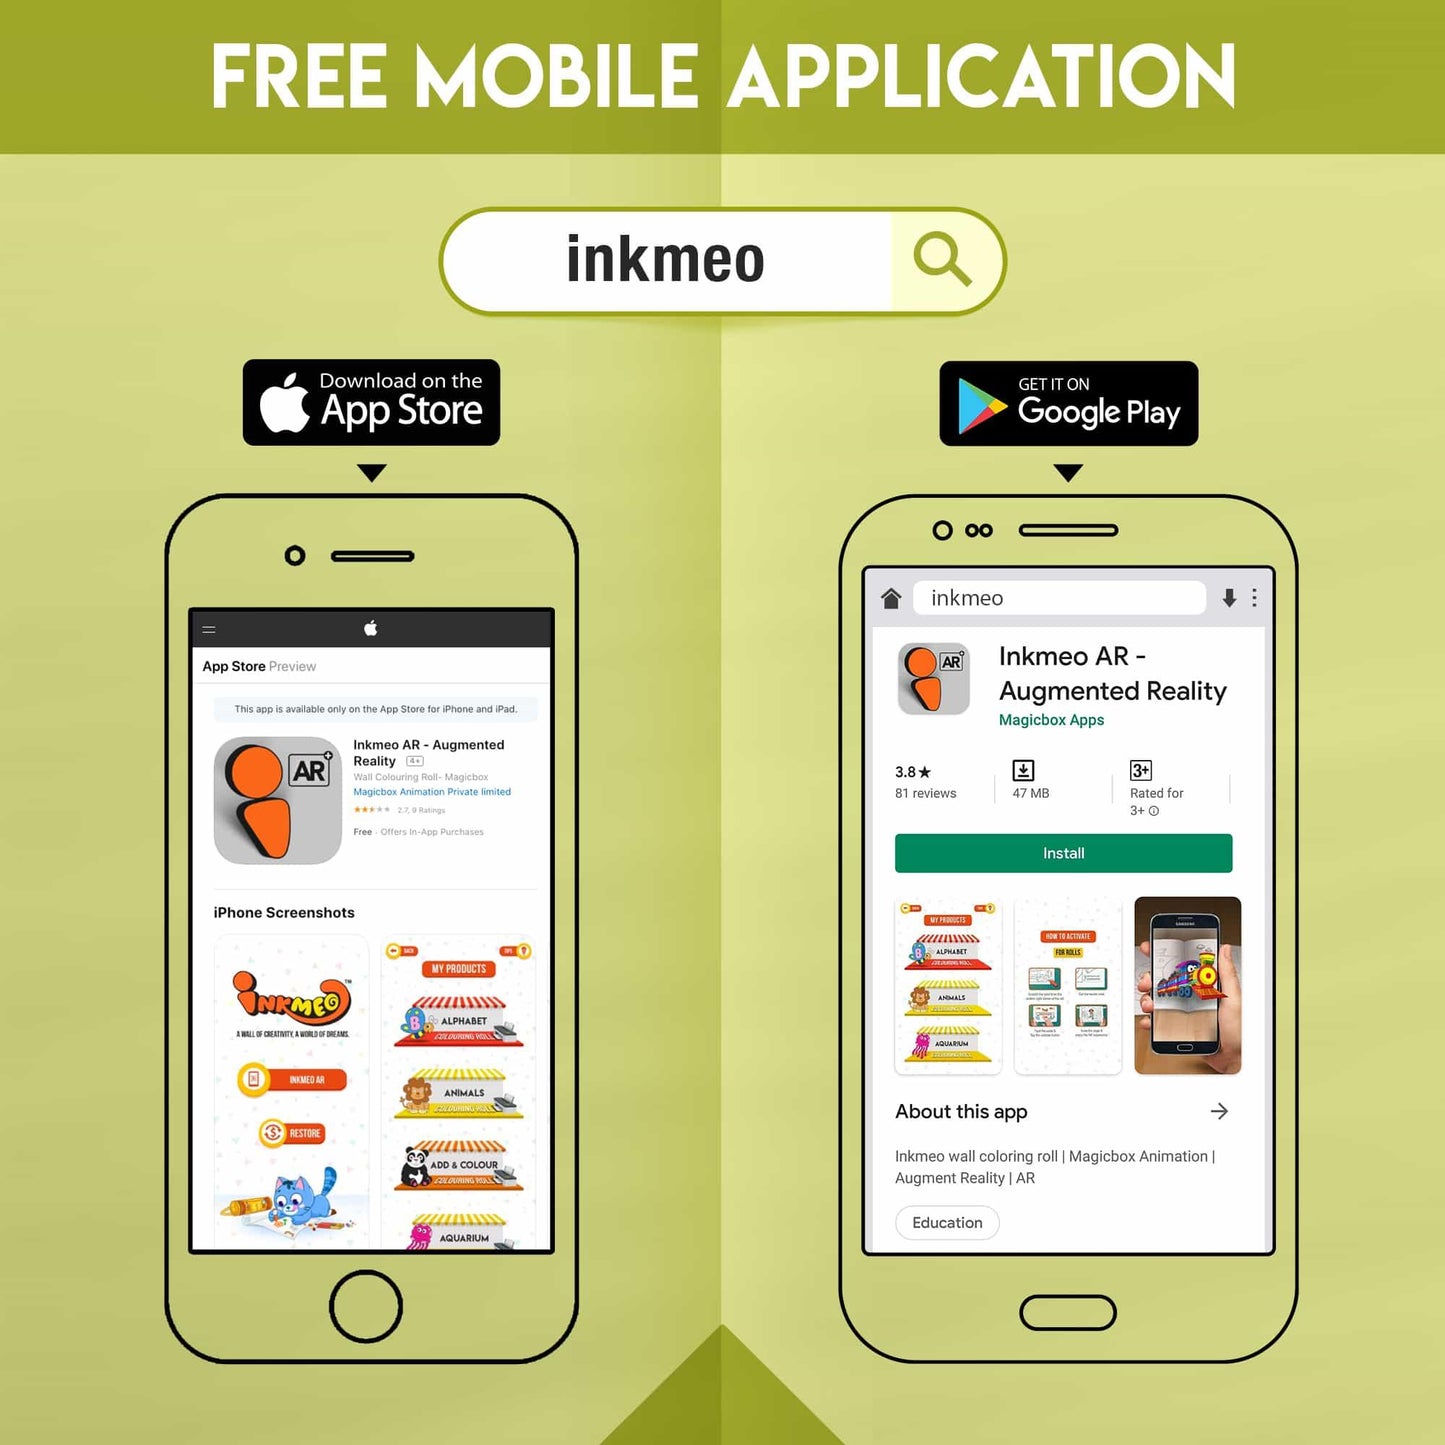 The image demonstrates how to install the Inkmeo app from both the App Store and Play Store, as it is a free mobile application.